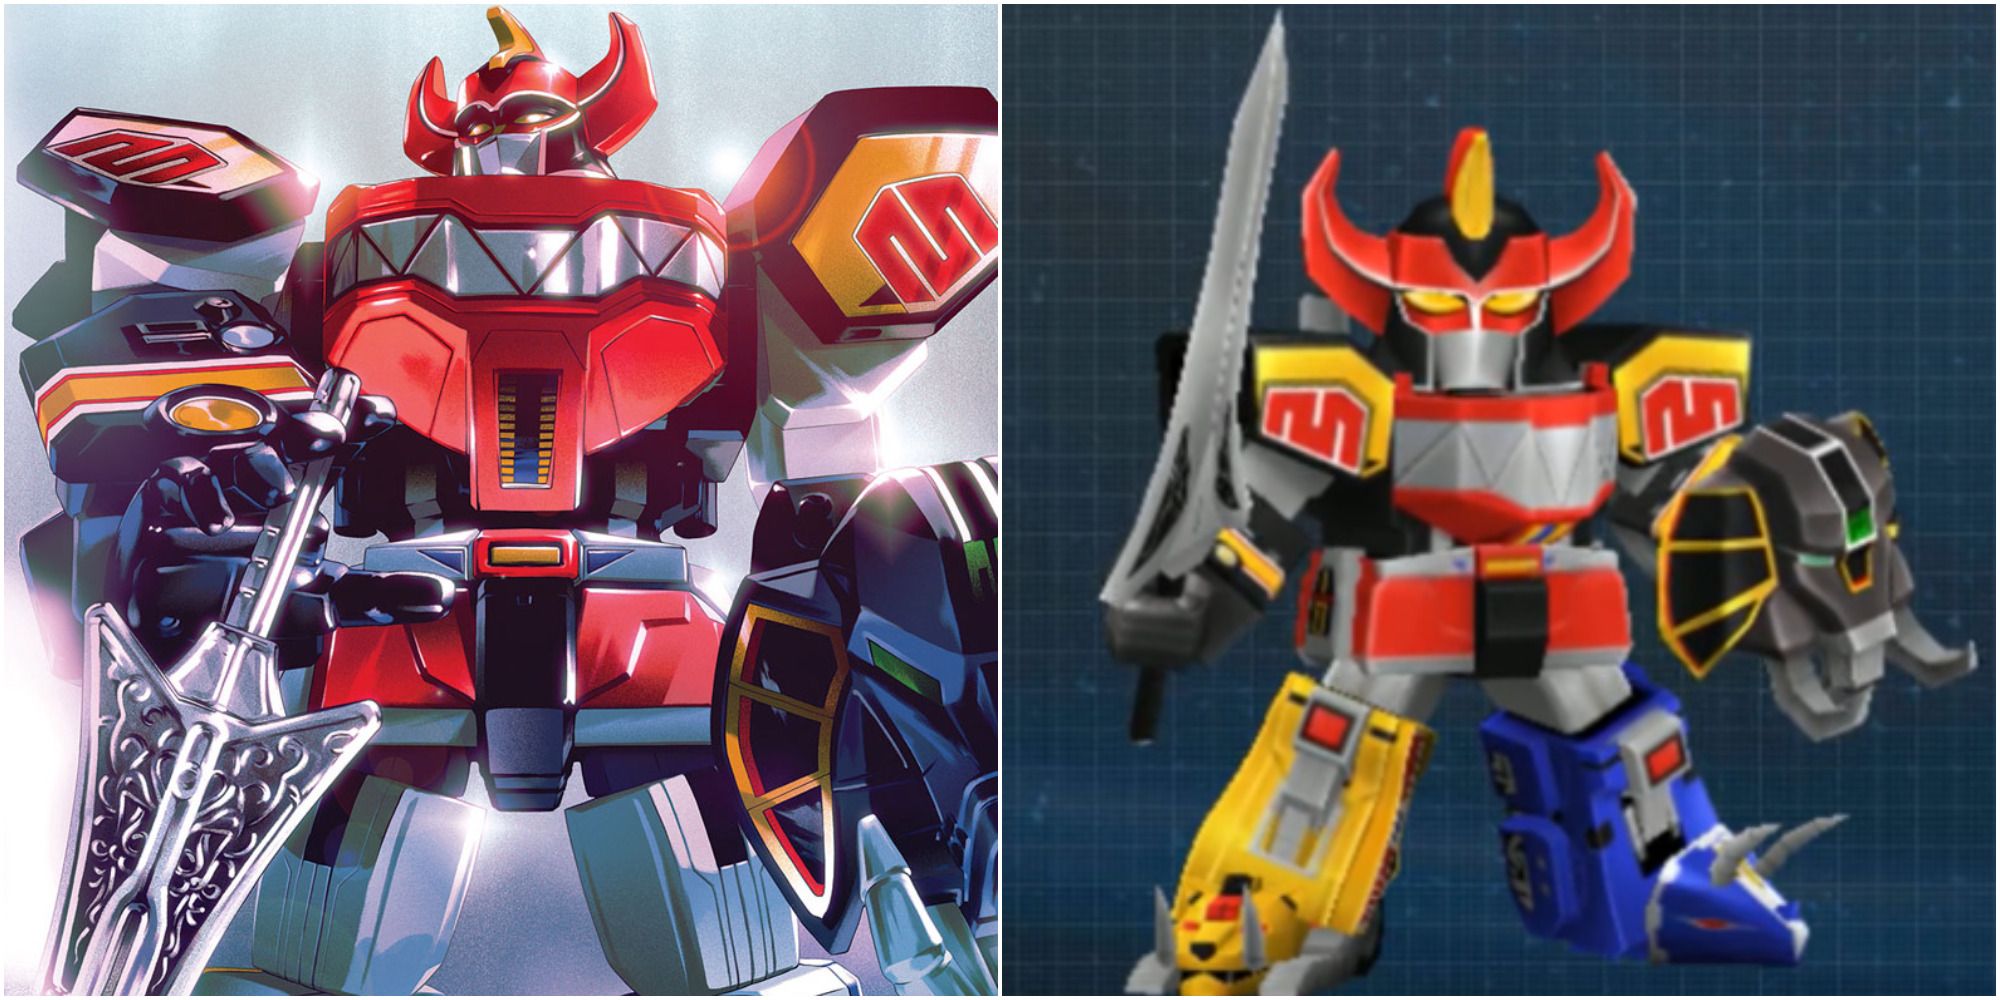 The dino megazord as it appears in Boom Studios' Power Rangers comic and counterpart  Daizyujin in Super Robot Wars